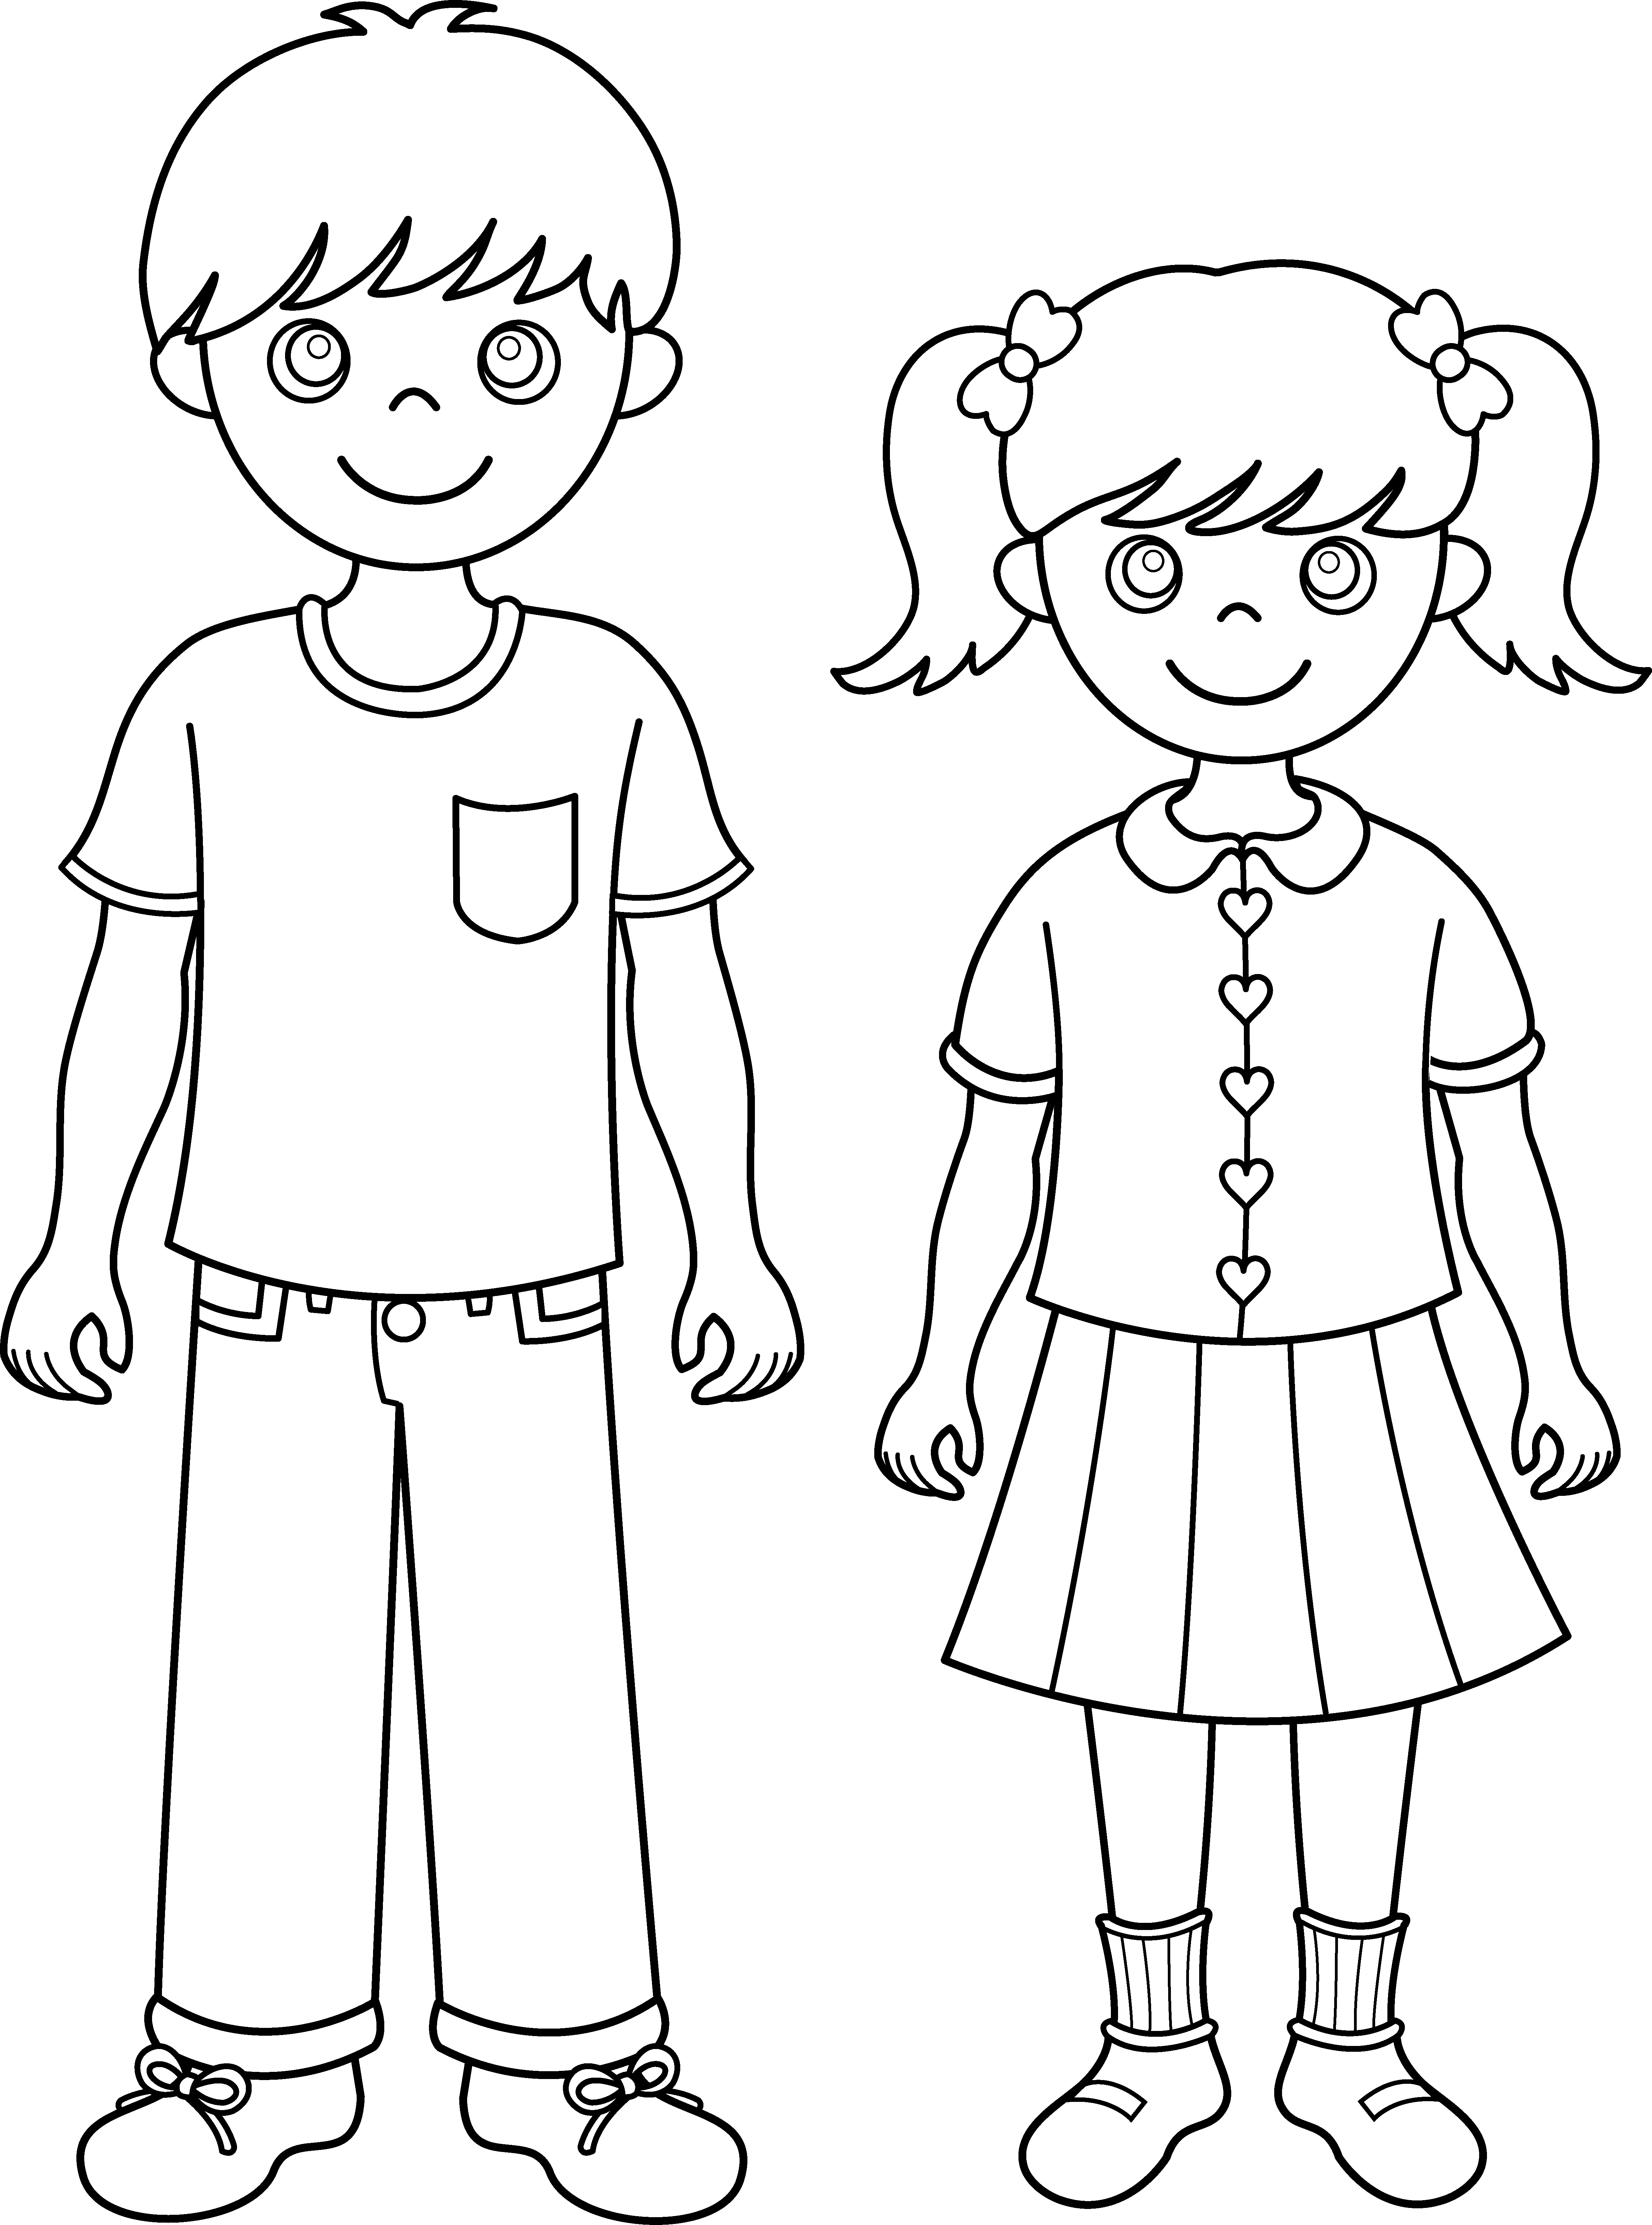 Free Black And White Siblings, Download Free Clip Art, Free.